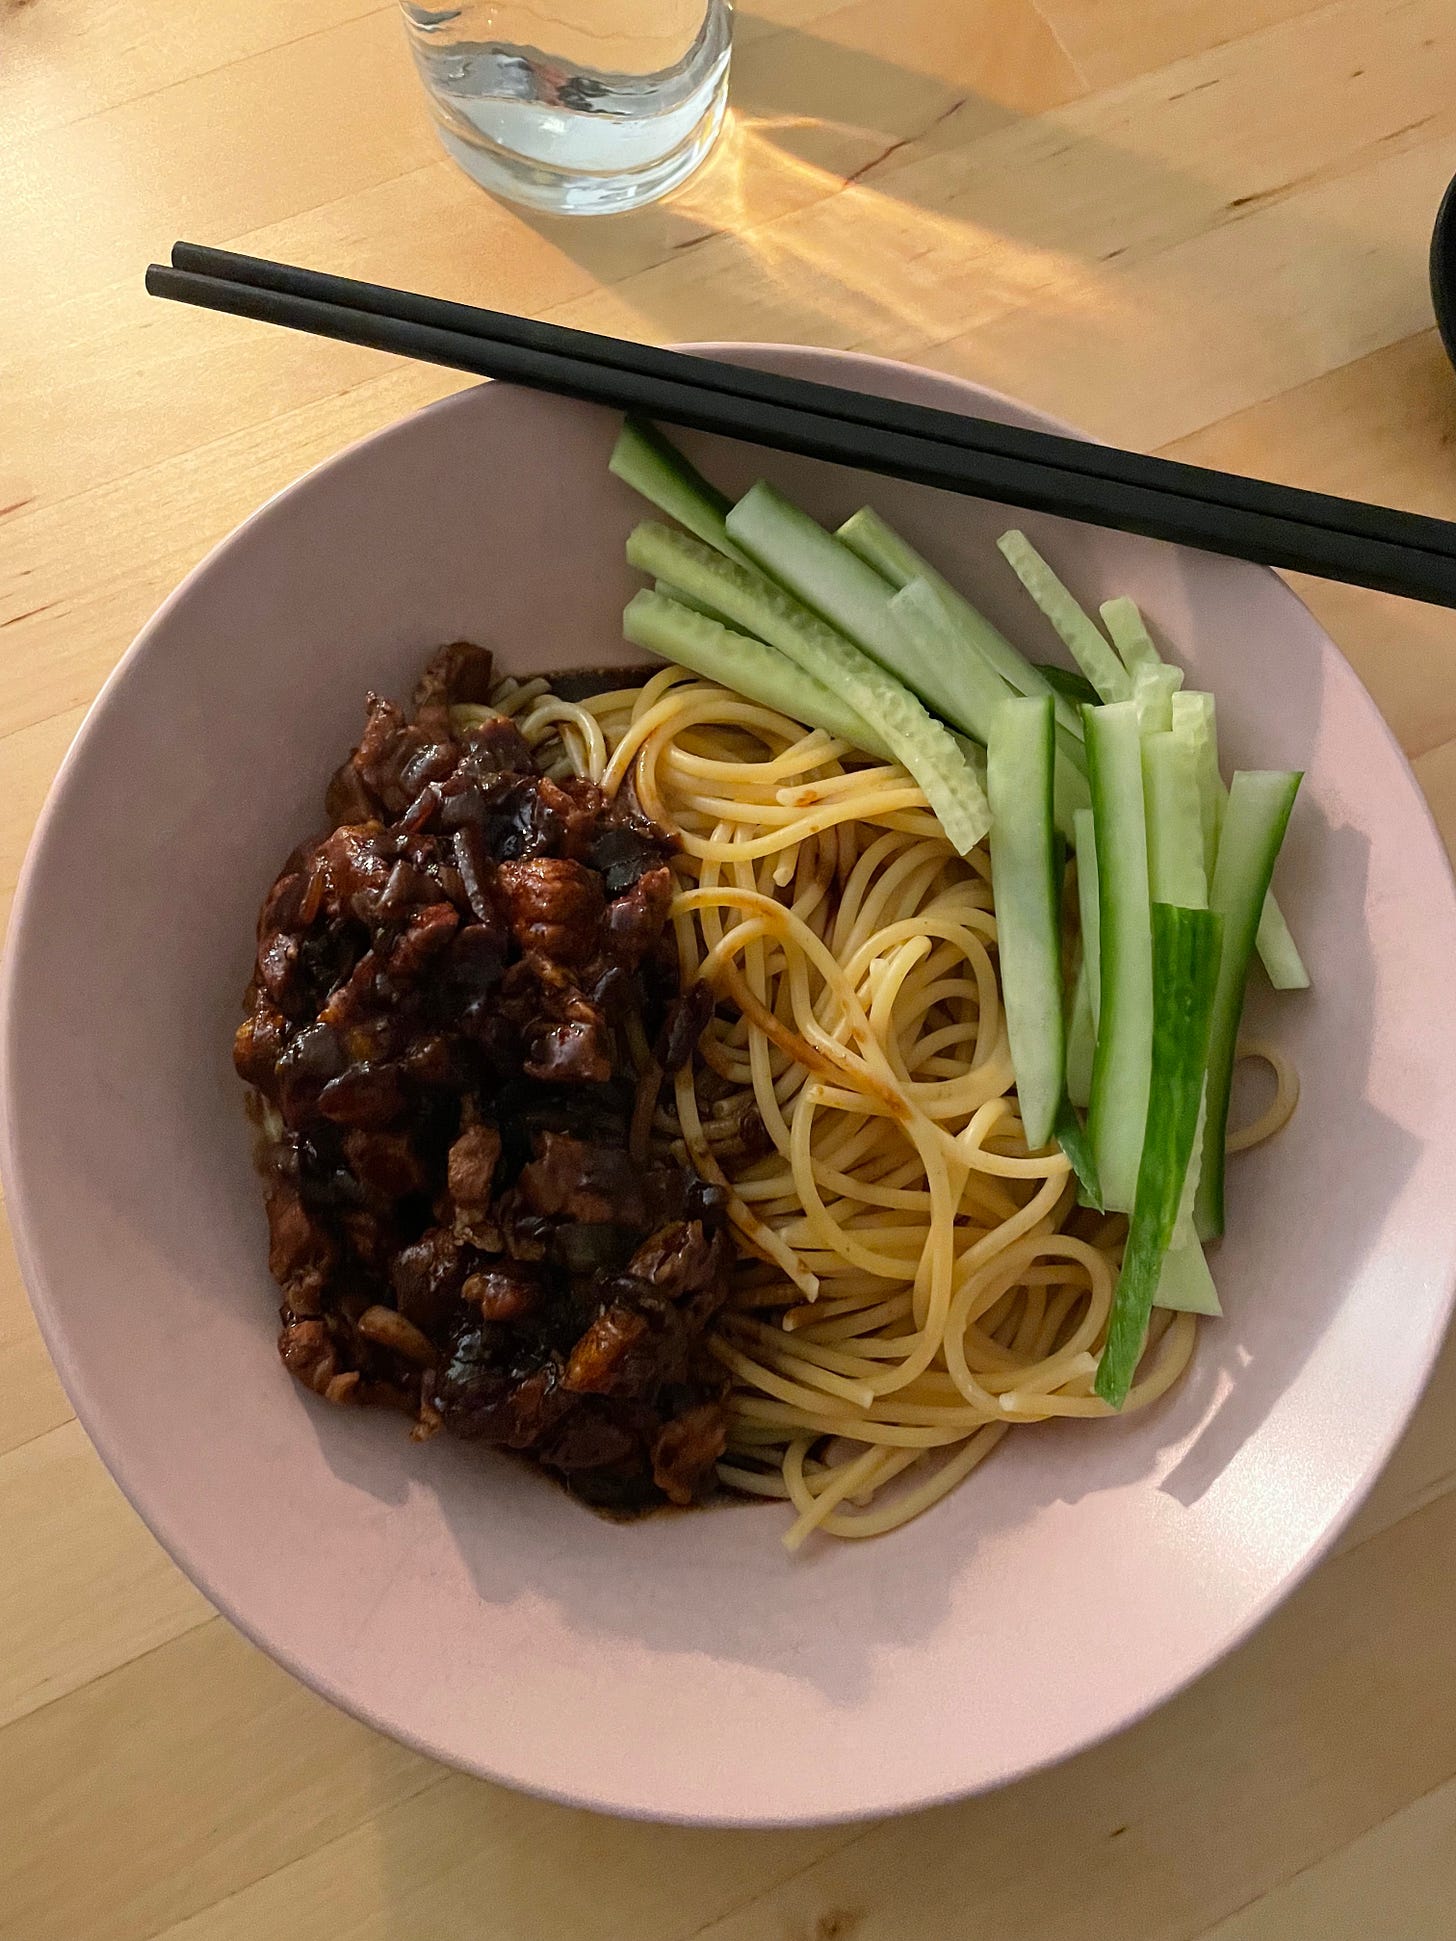 Pink bowl filled with spaghetti and a black bean sauce with pork belly. Sliced cucumber on the side, a Korean dish called Jajanmyeon.